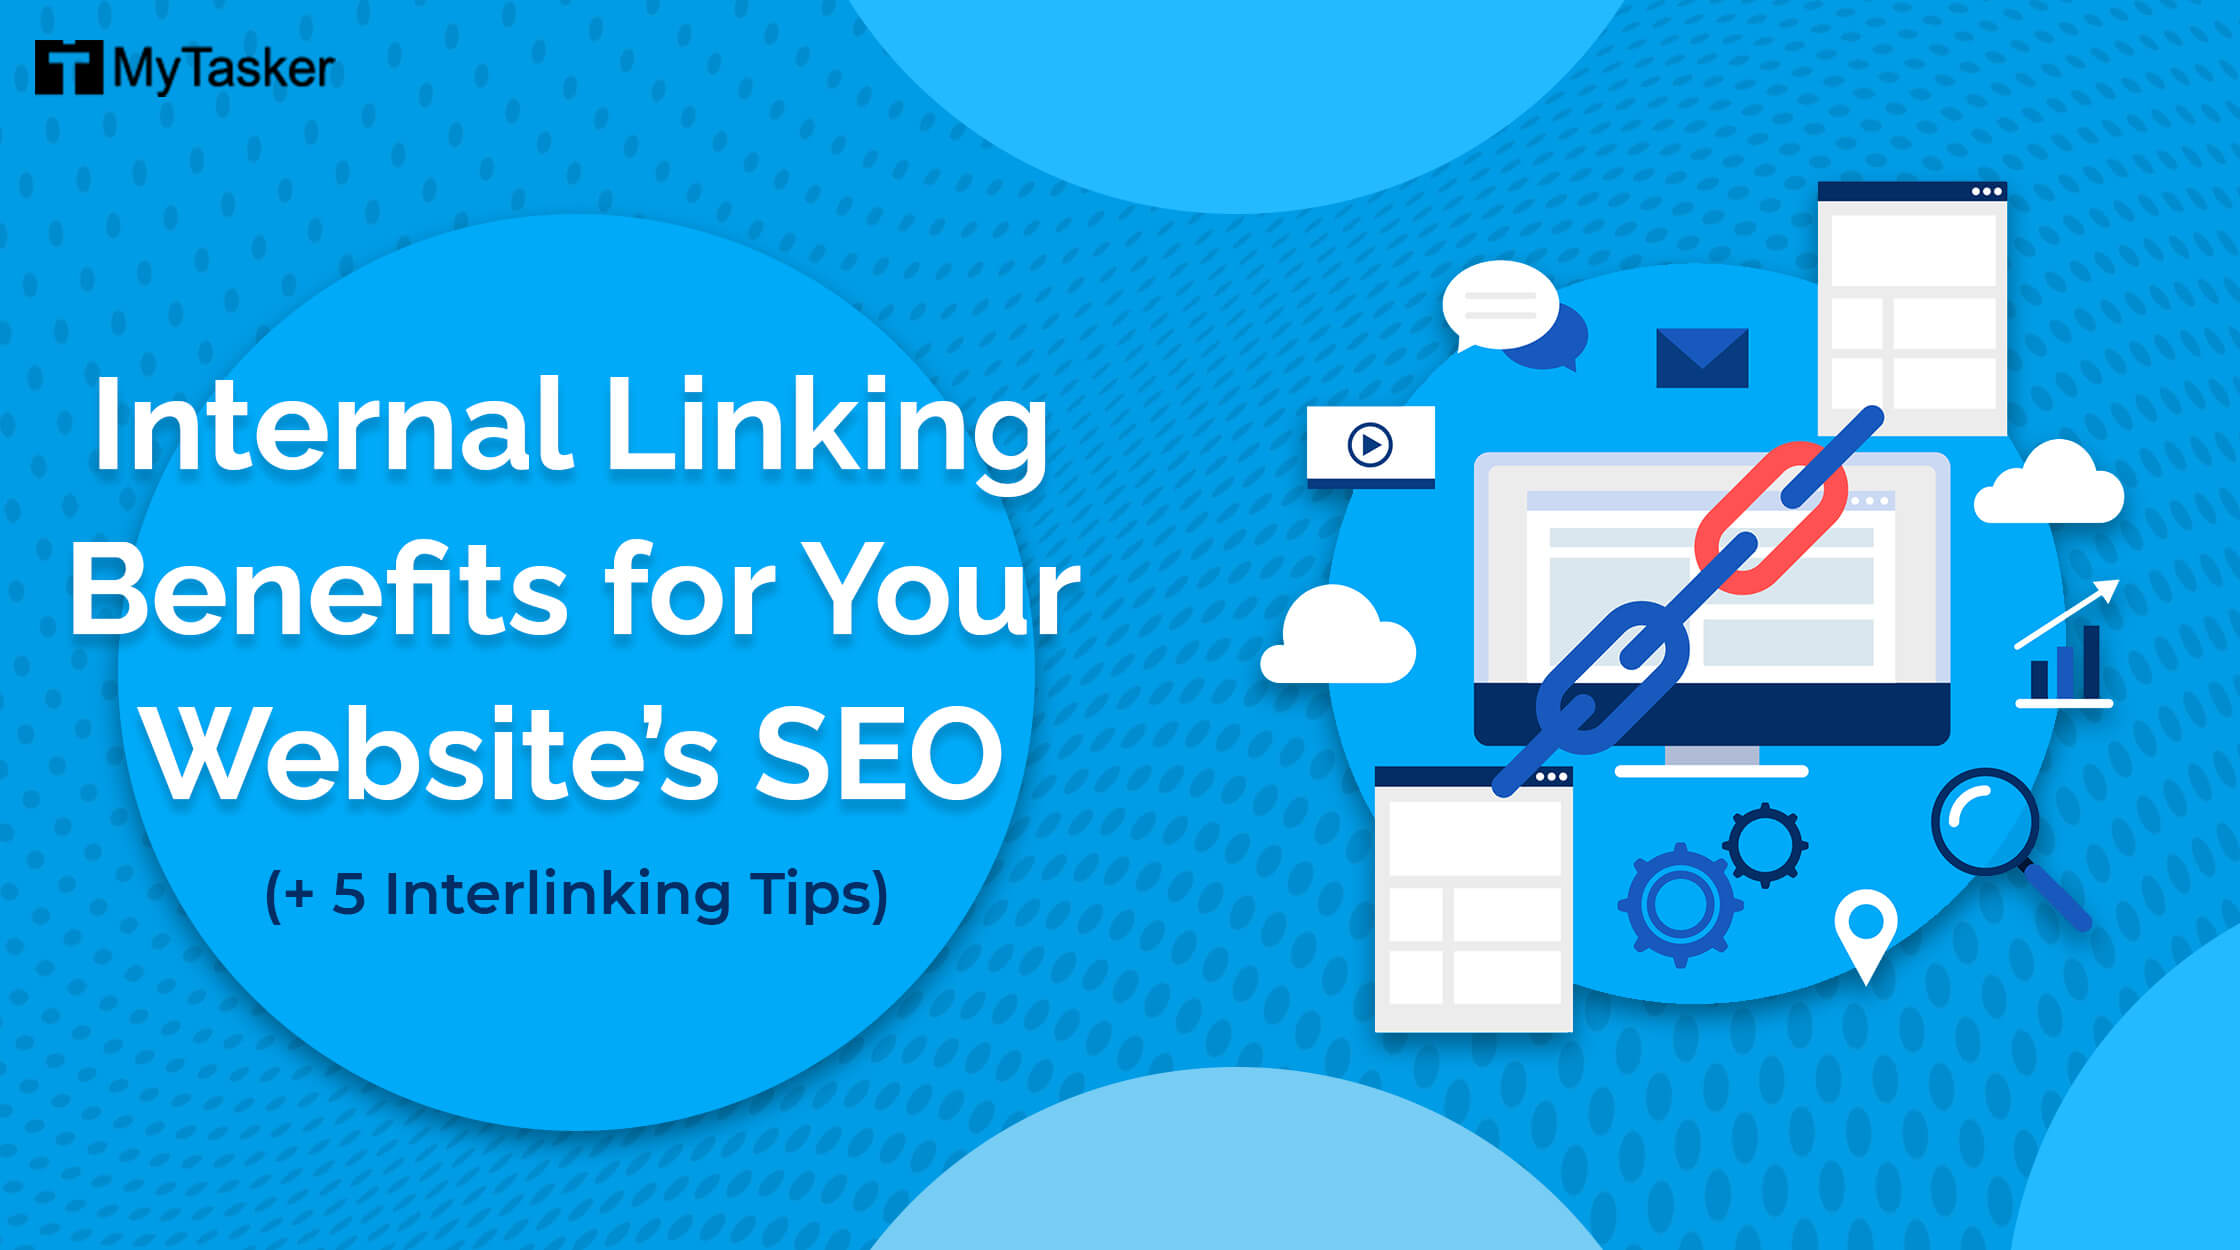 Internal Linking Benefits for Your Website’s SEO (+ 5 Interlinking Tips)